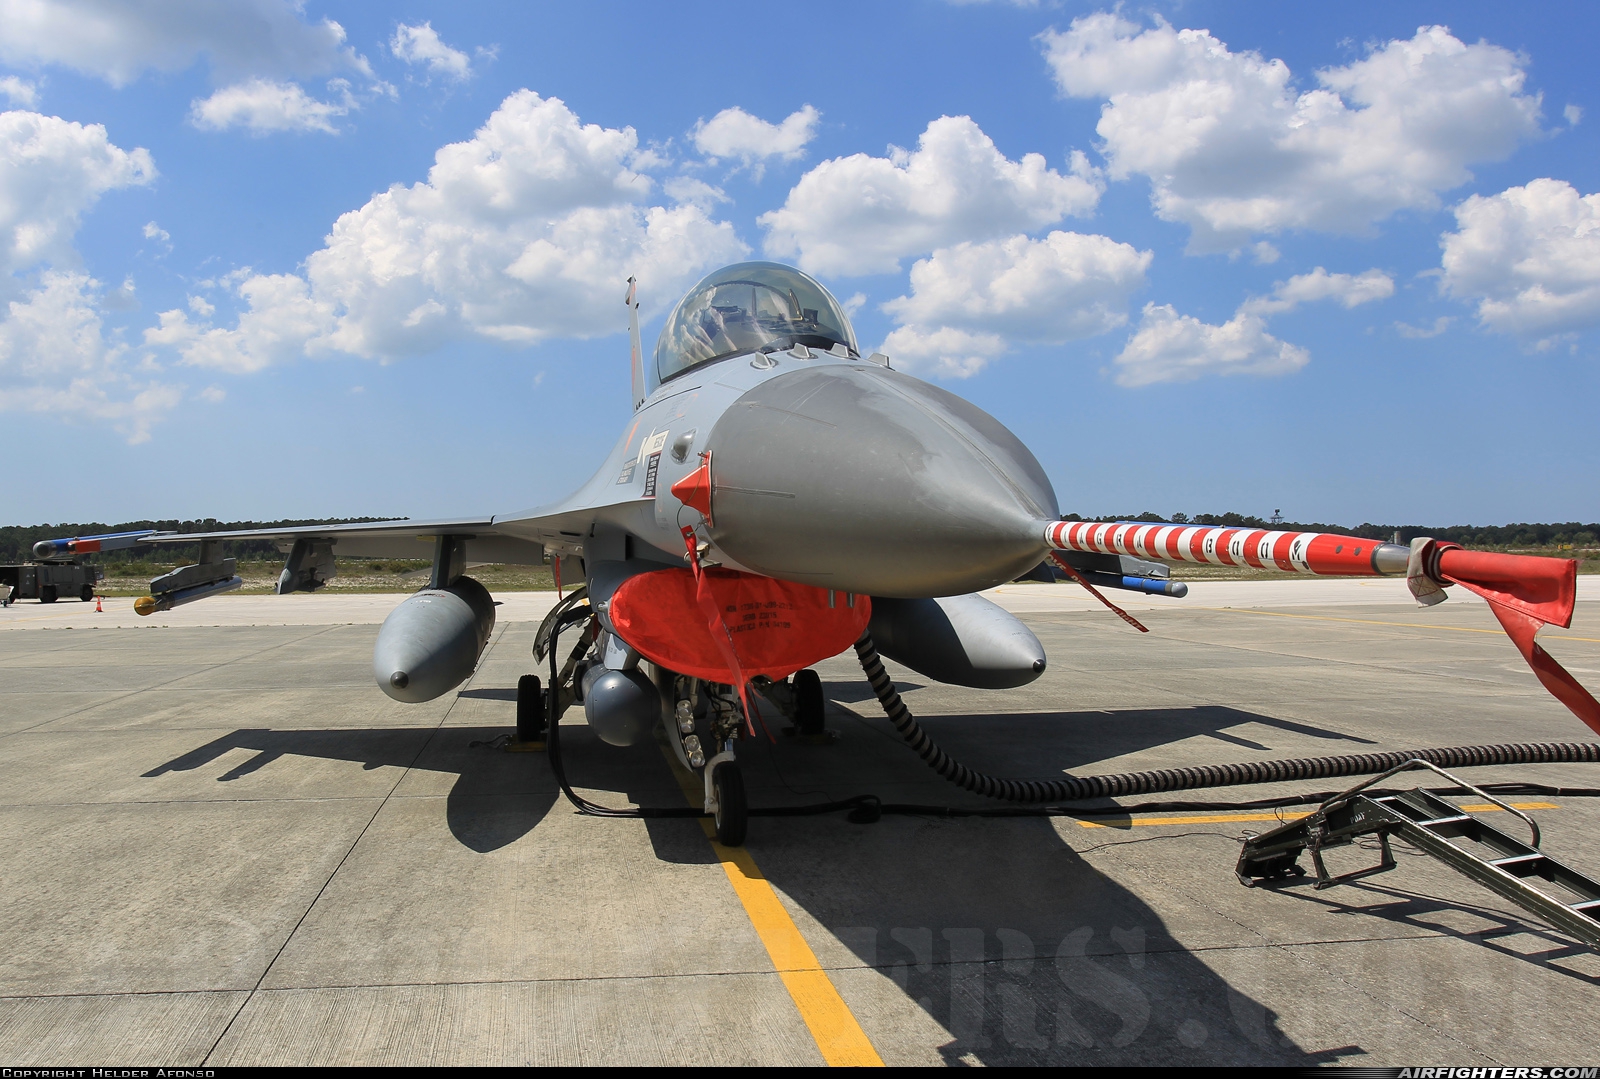 Netherlands - Air Force General Dynamics F-16BM Fighting Falcon J-066 at Monte Real (BA5) (LPMR), Portugal